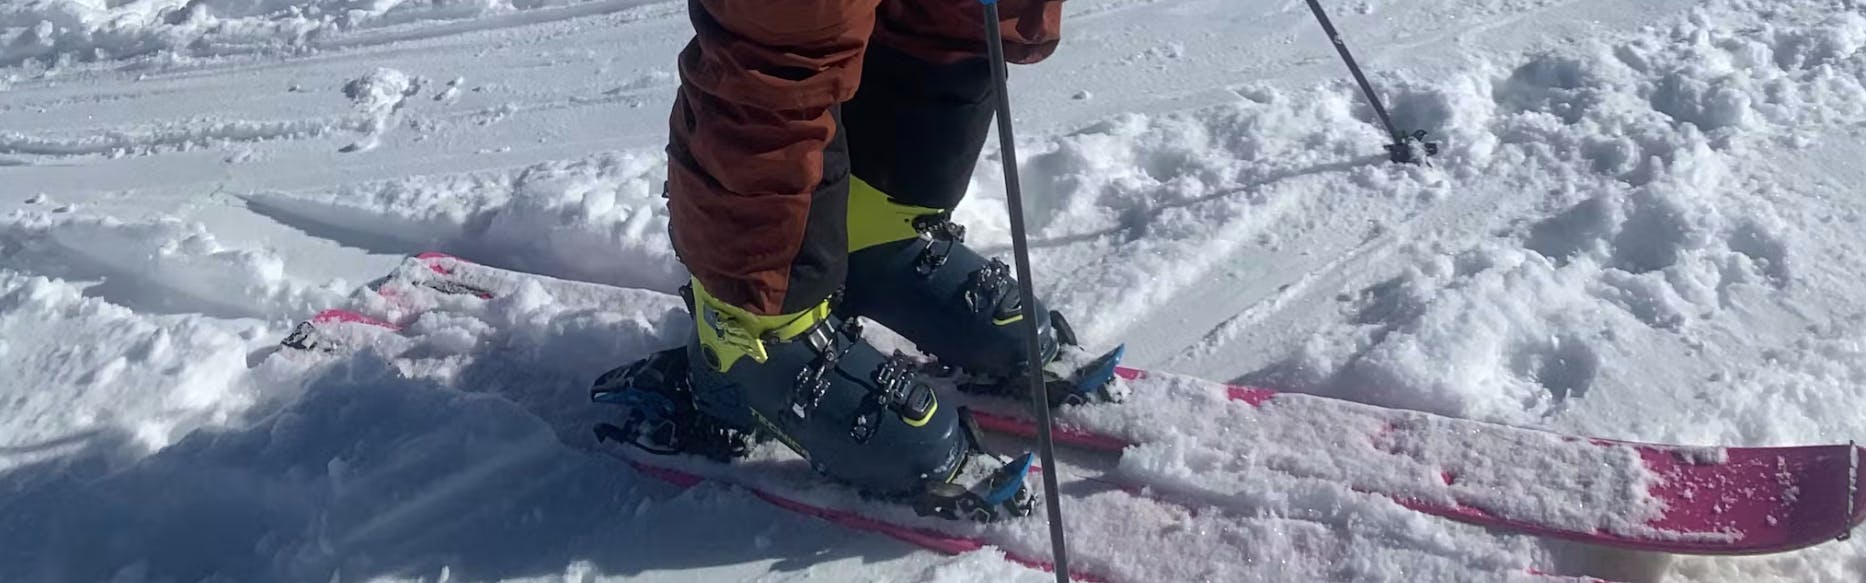 Close up of the Tecnica Zero G Tour Ski Boots being used on skis. 